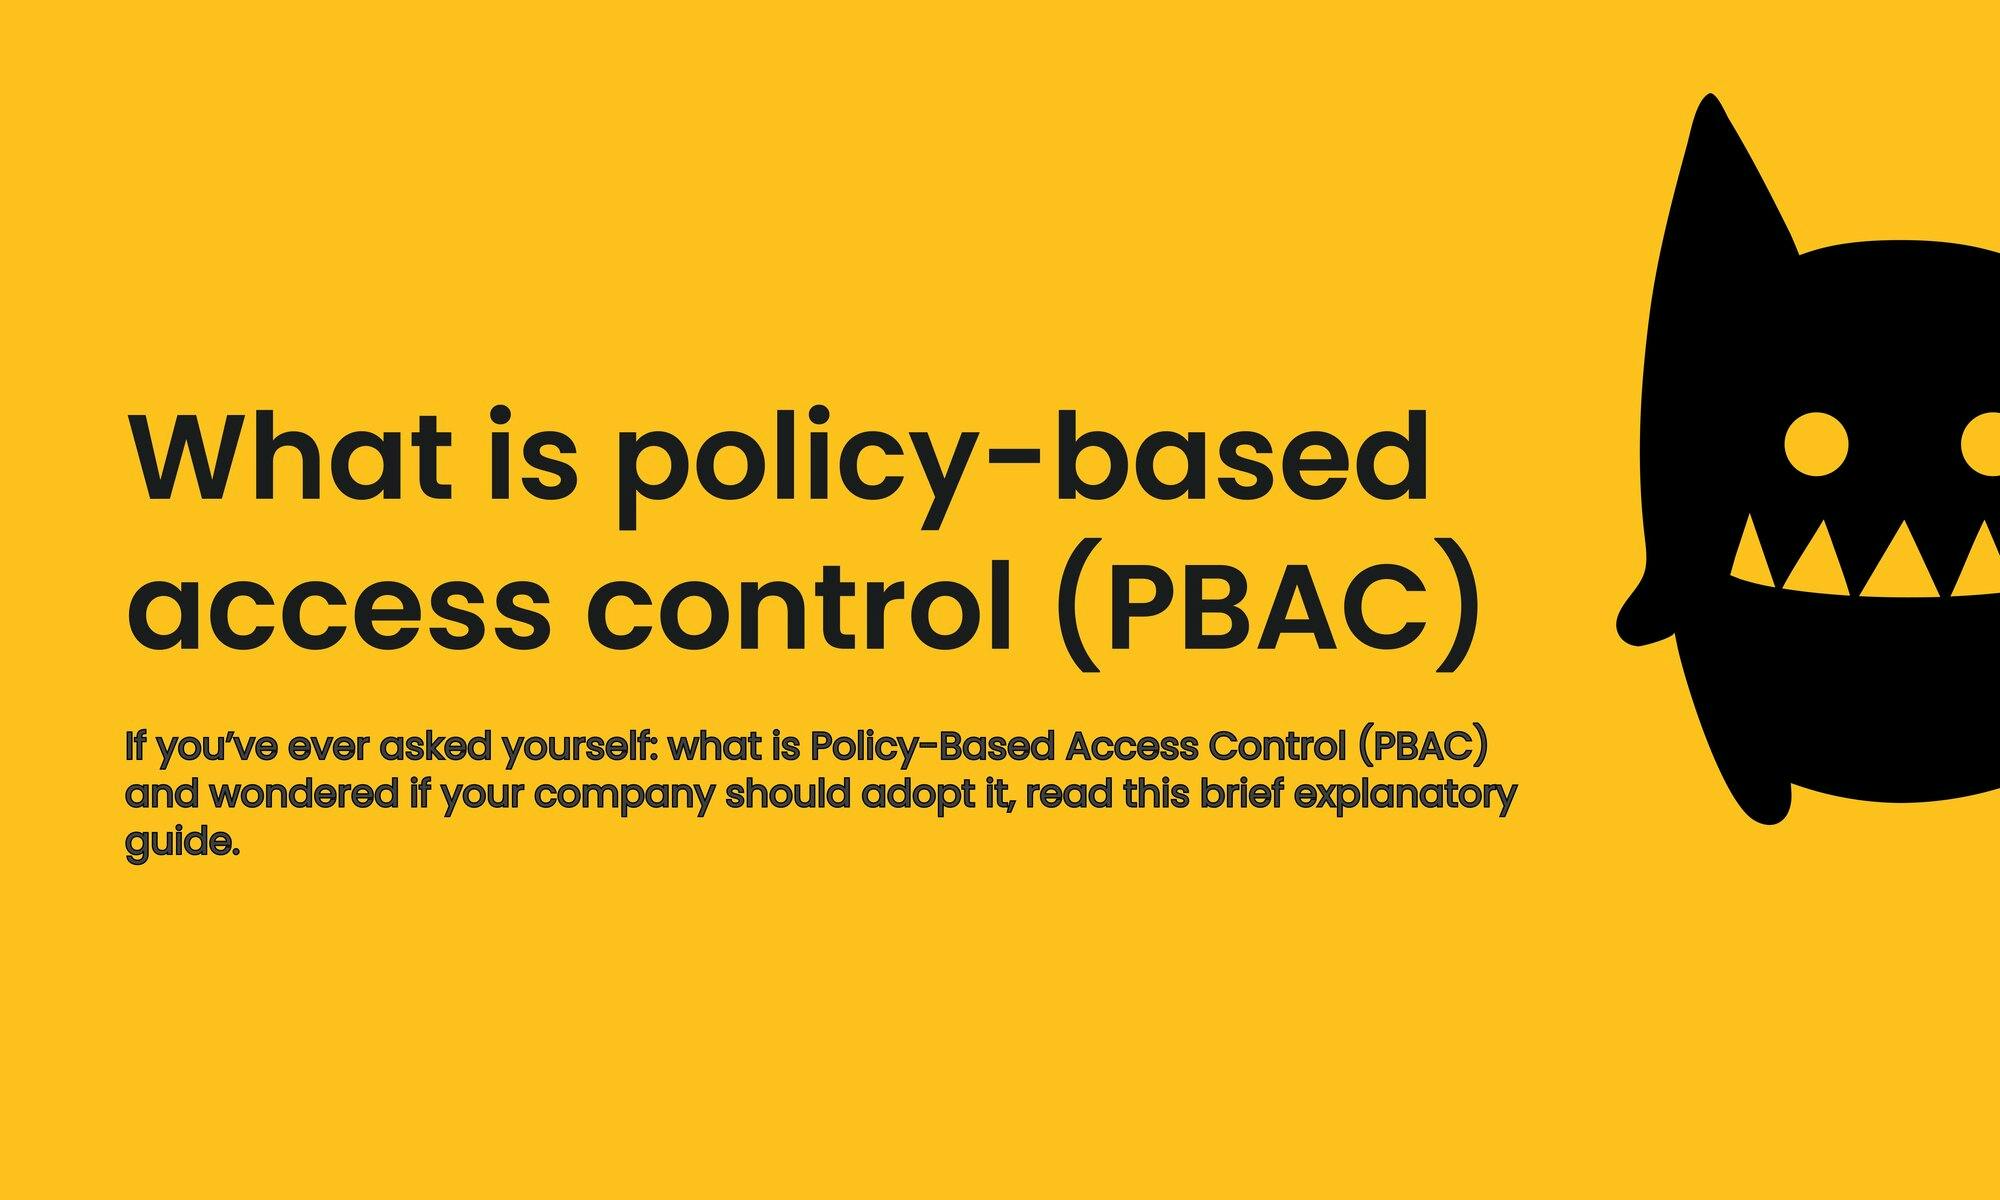 What is policy-based access control (PBAC)?